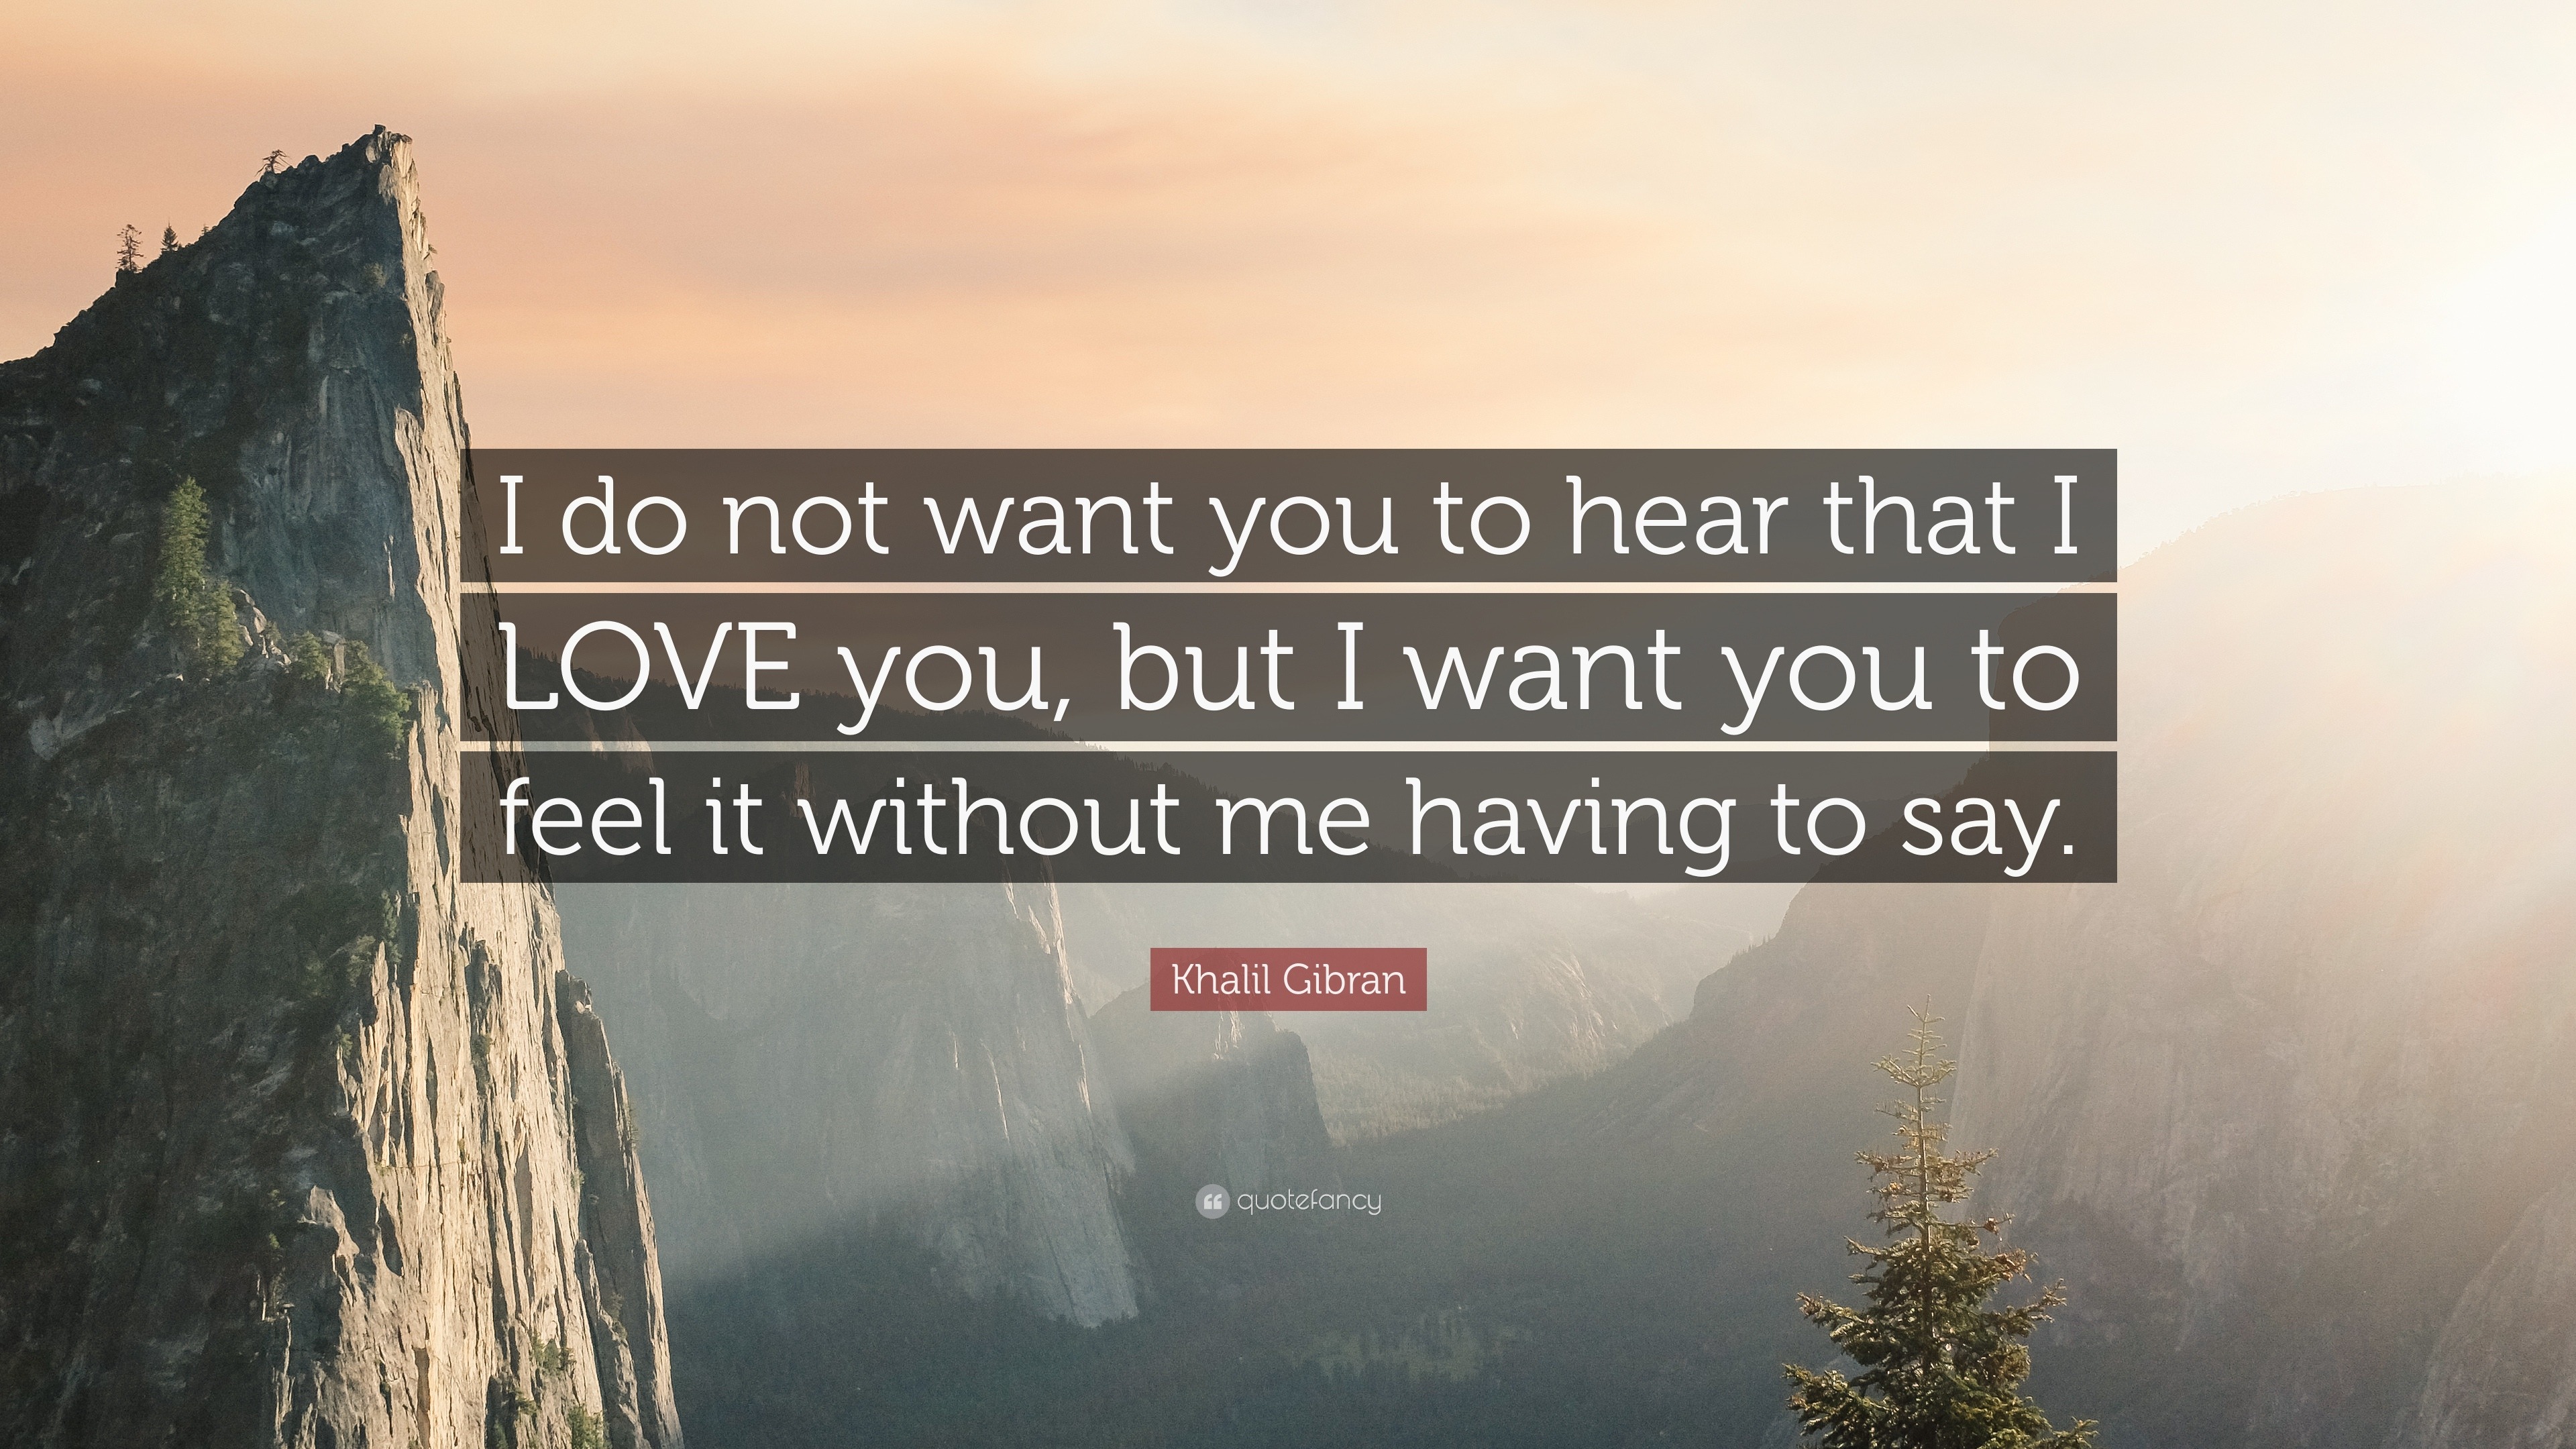 Khalil Gibran Quote “I do not want you to hear that I LOVE you